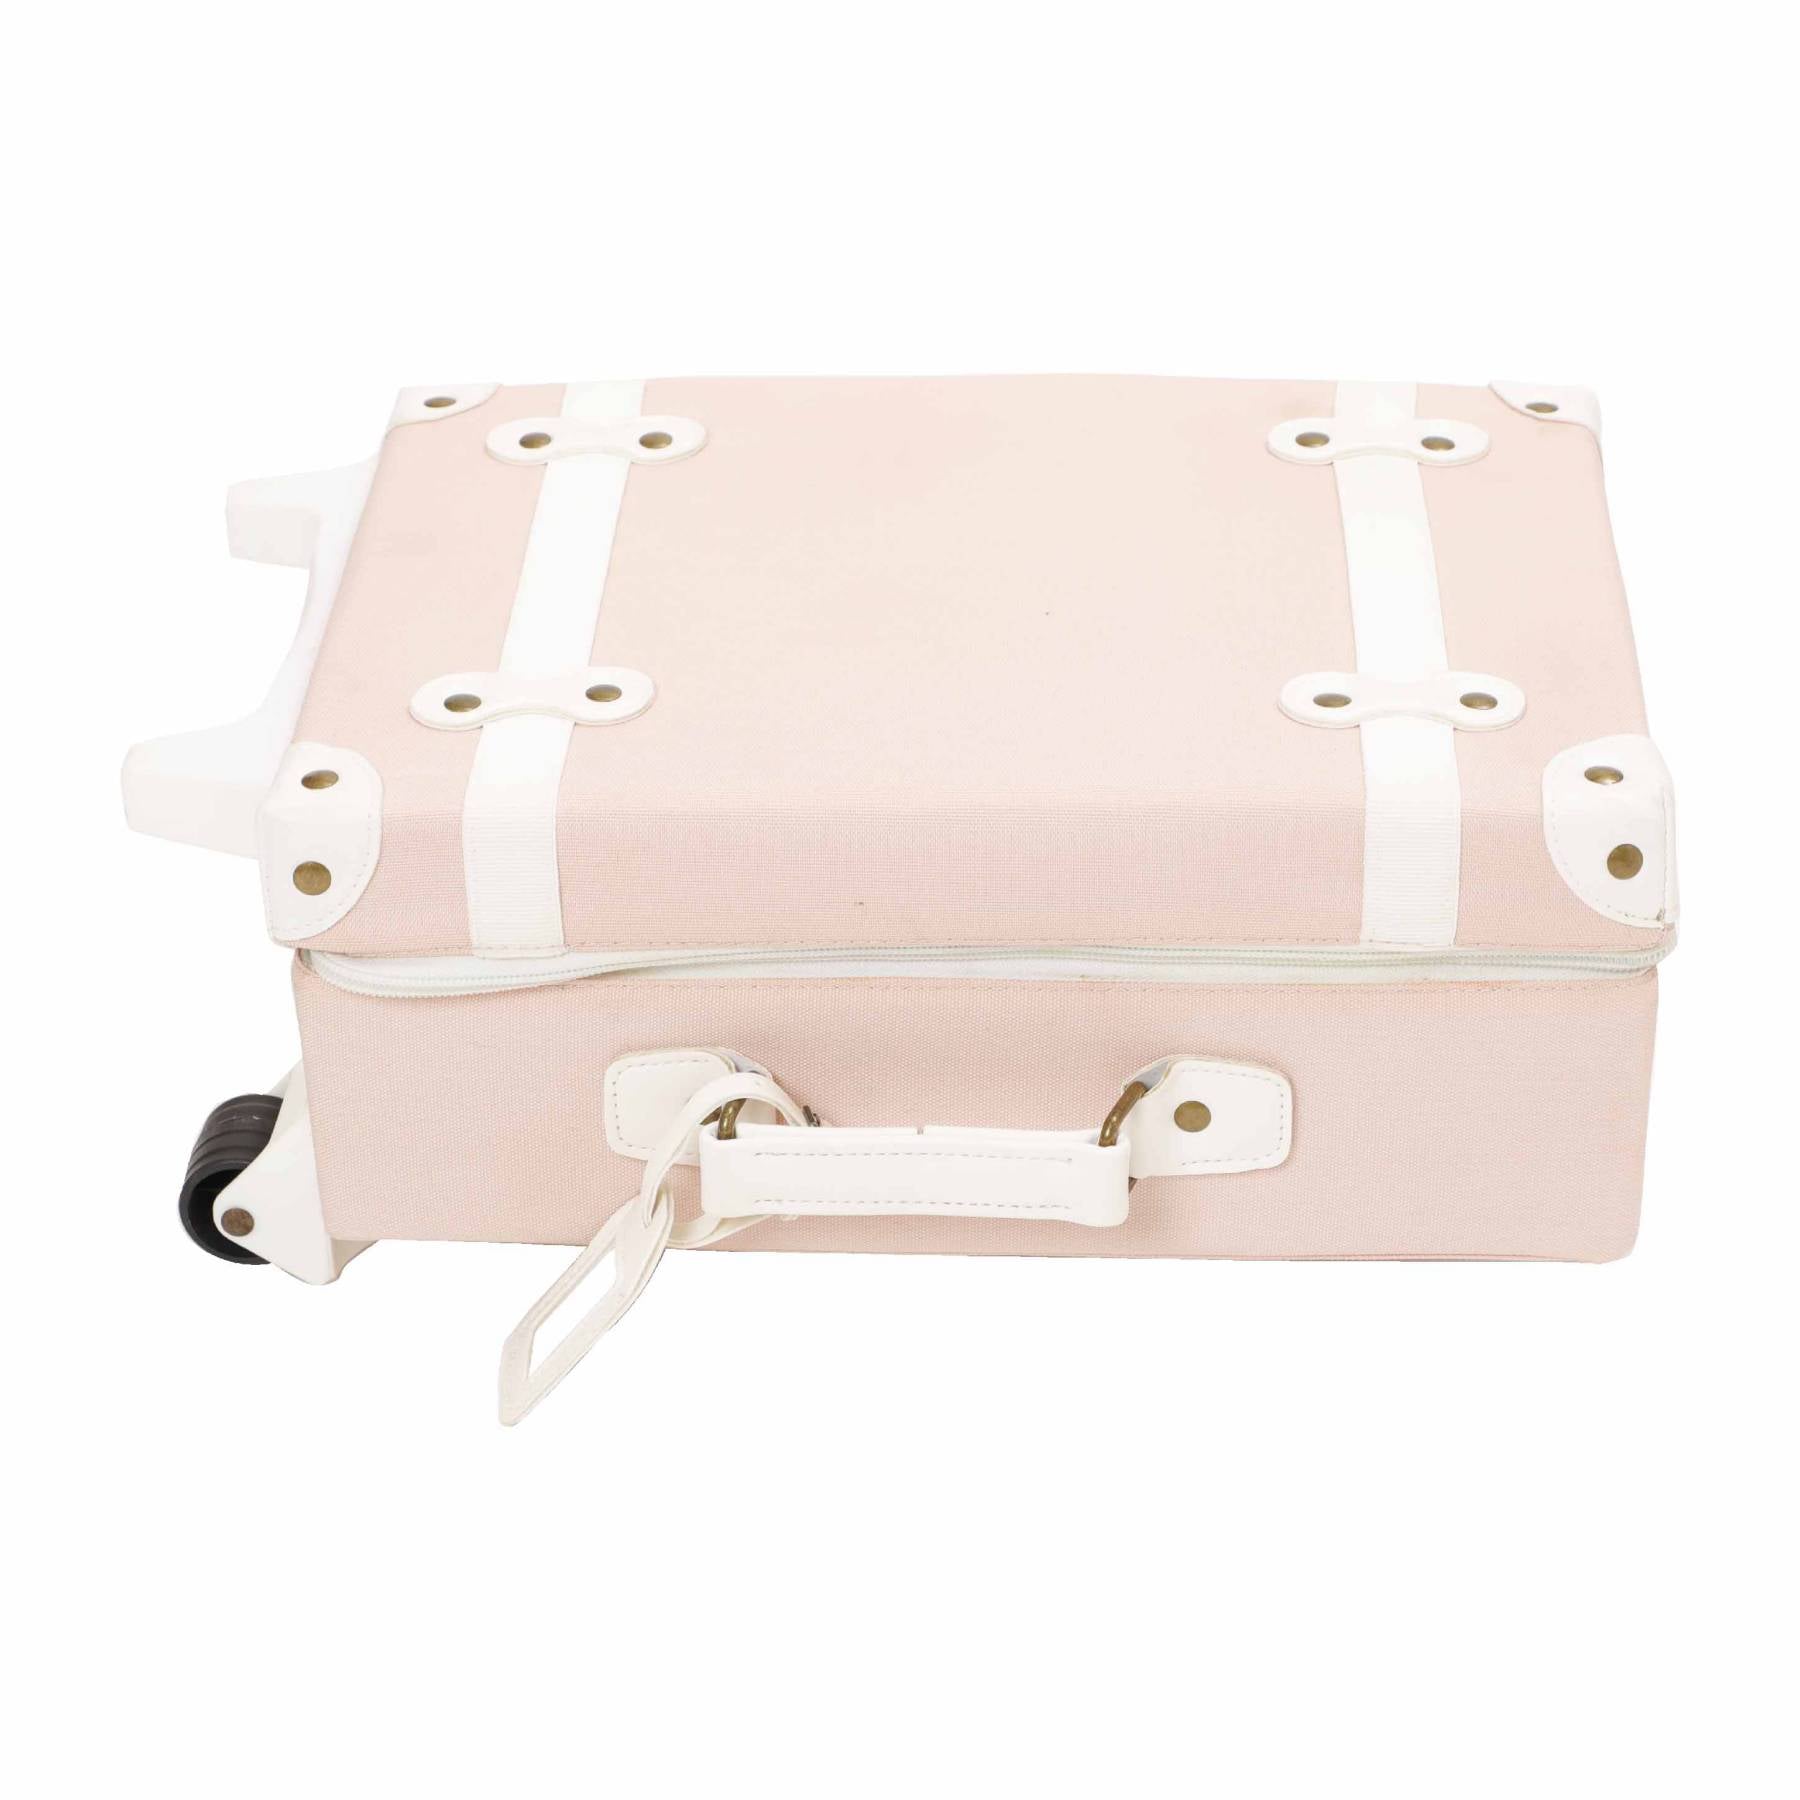 Snuggly Suitcase - Rose pink